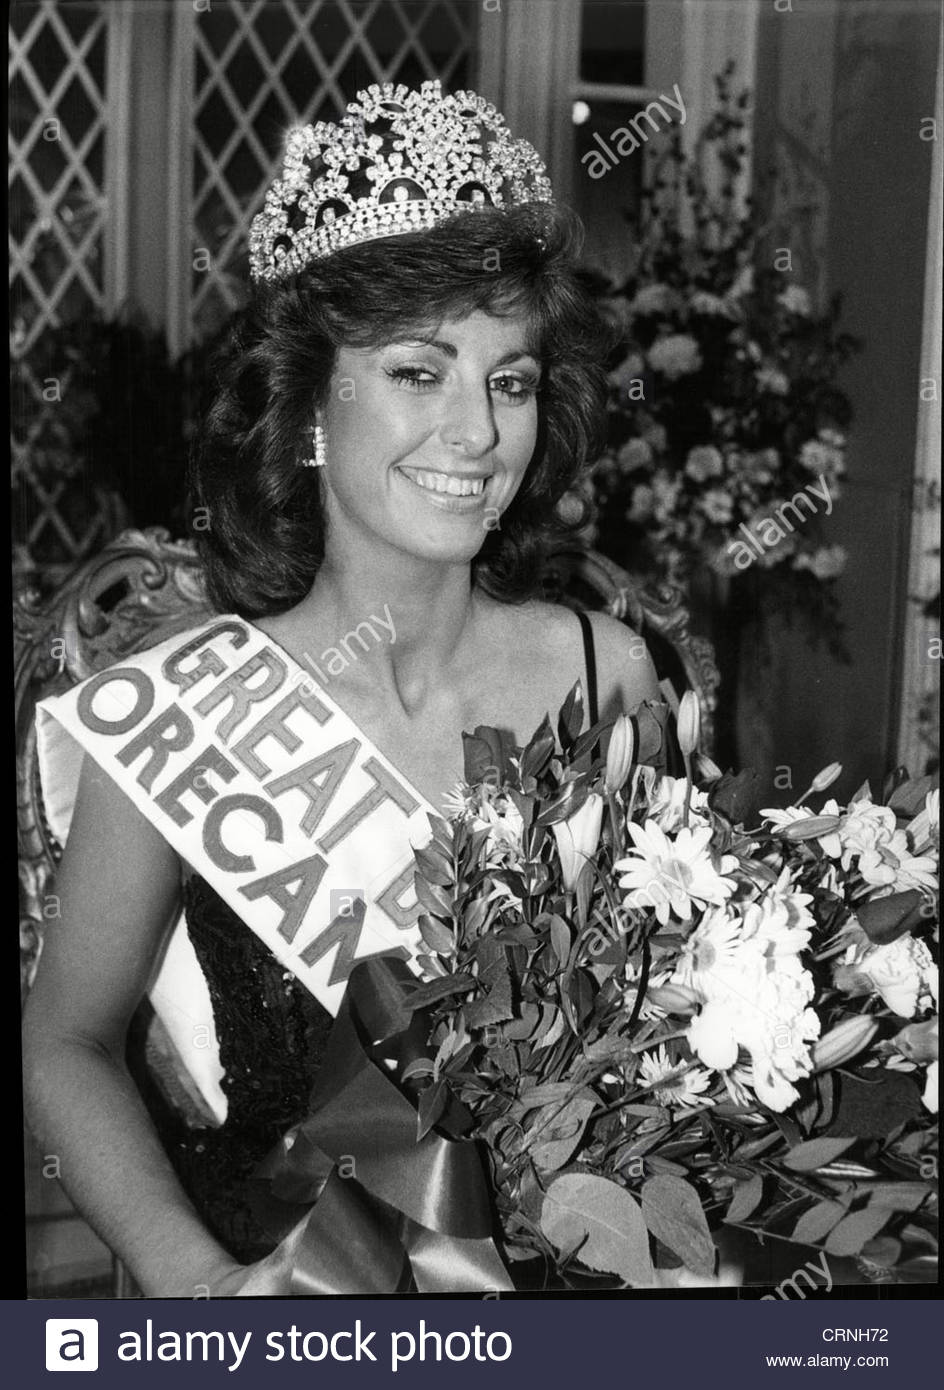 jill-saxby-miss-great-britain-with-tiara-and-CRNH72.jpg